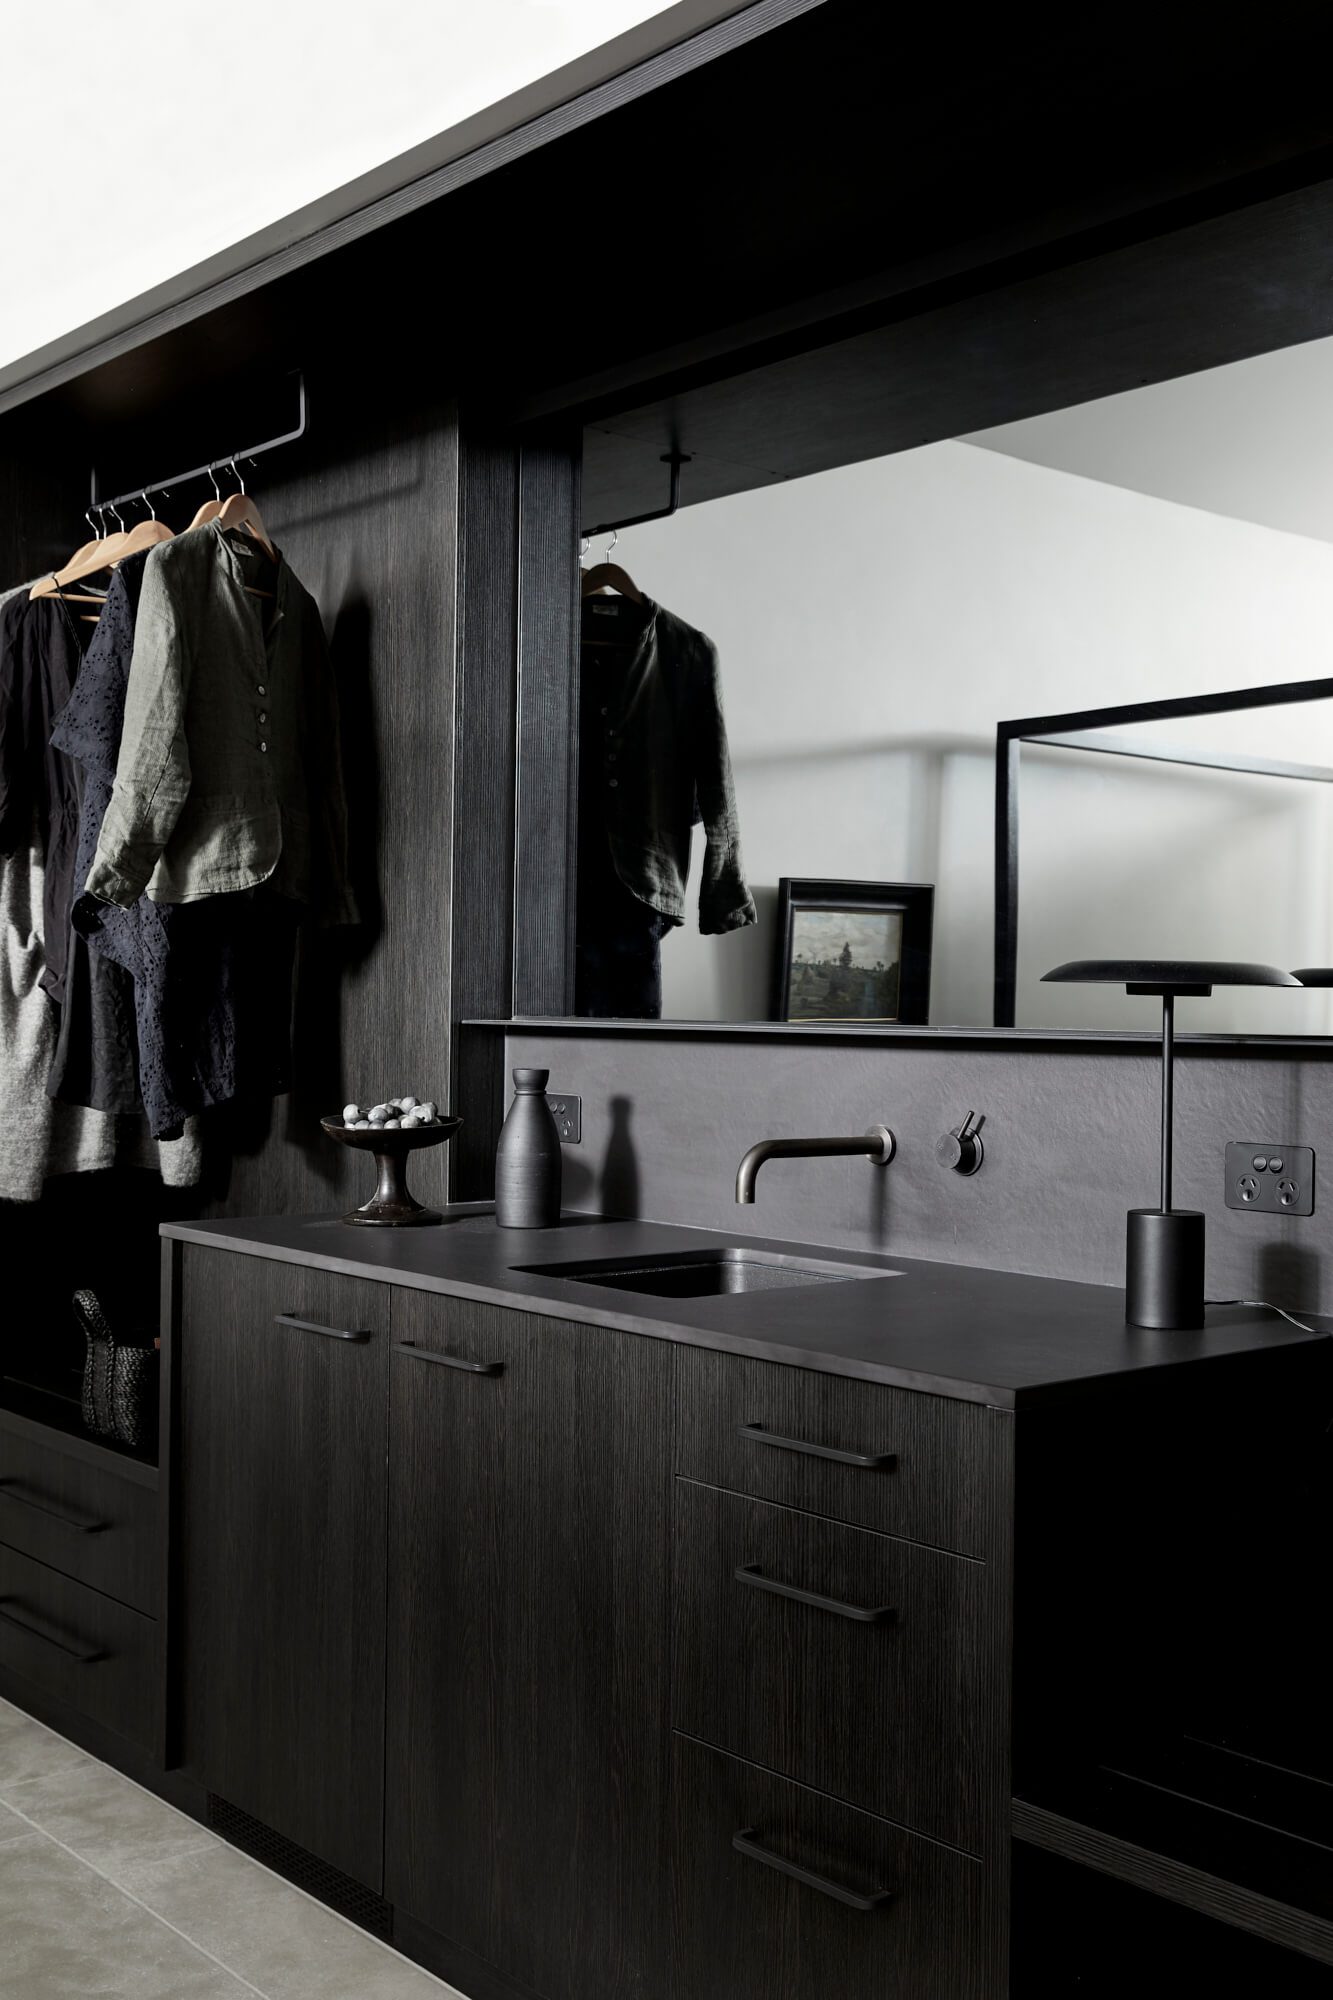 Kitchenette and open hanging wardrobe space at the Bower Studios at The Bower Byron Bay hotel